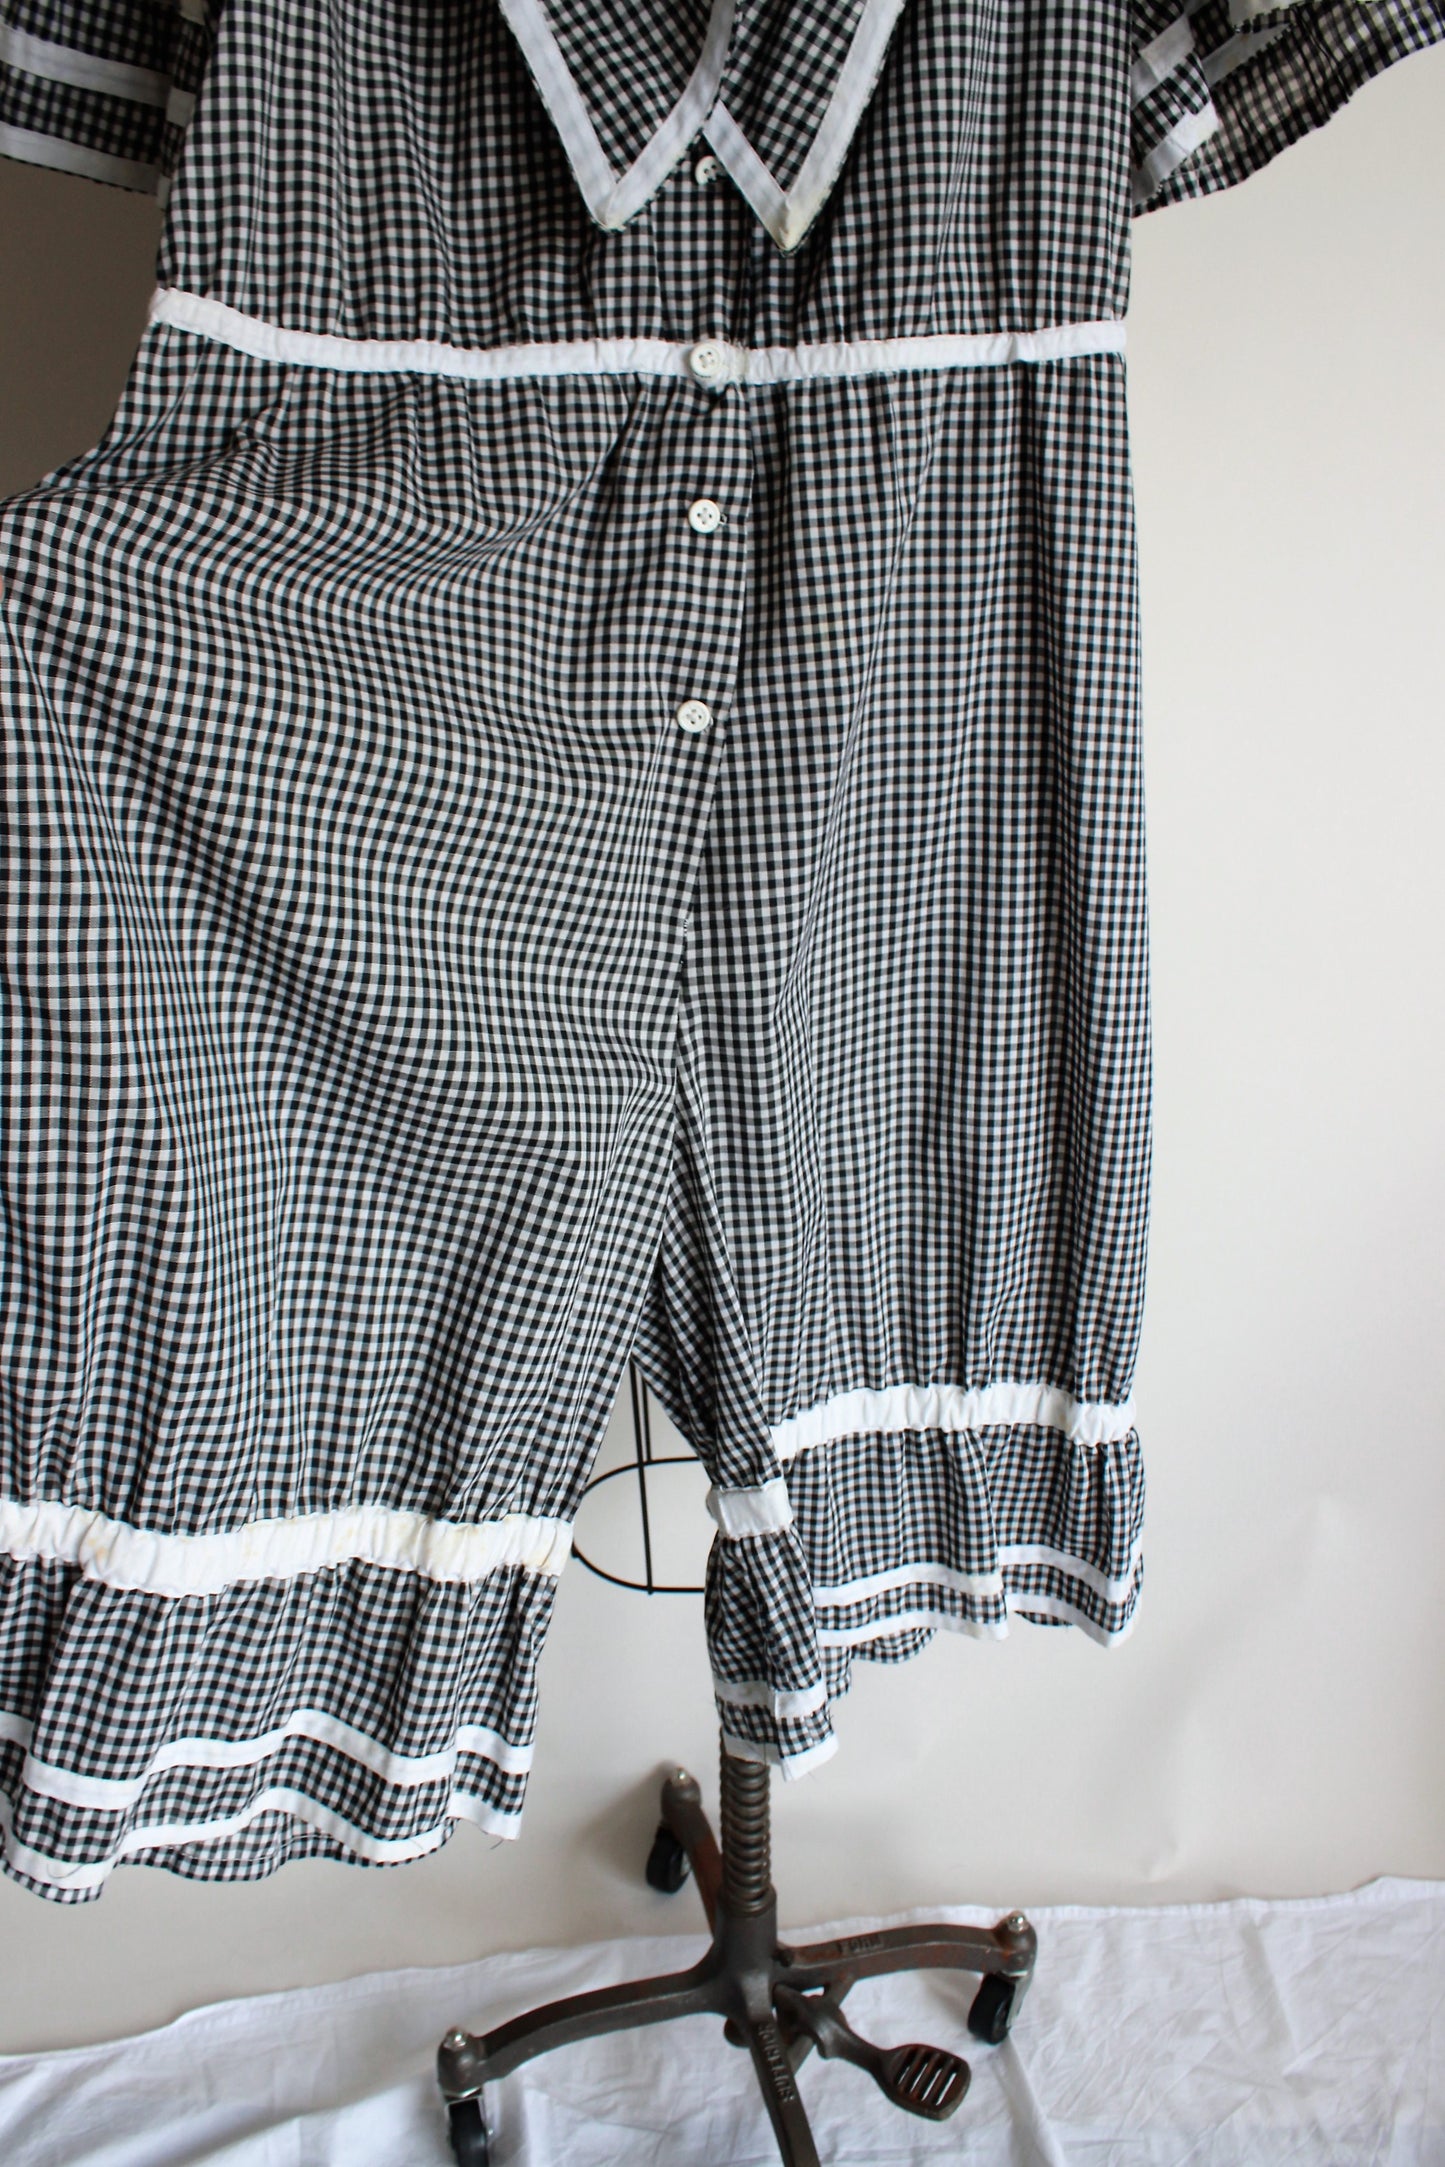 Vintage 1960s Gingham Swimsuit Costume in 1900s Style